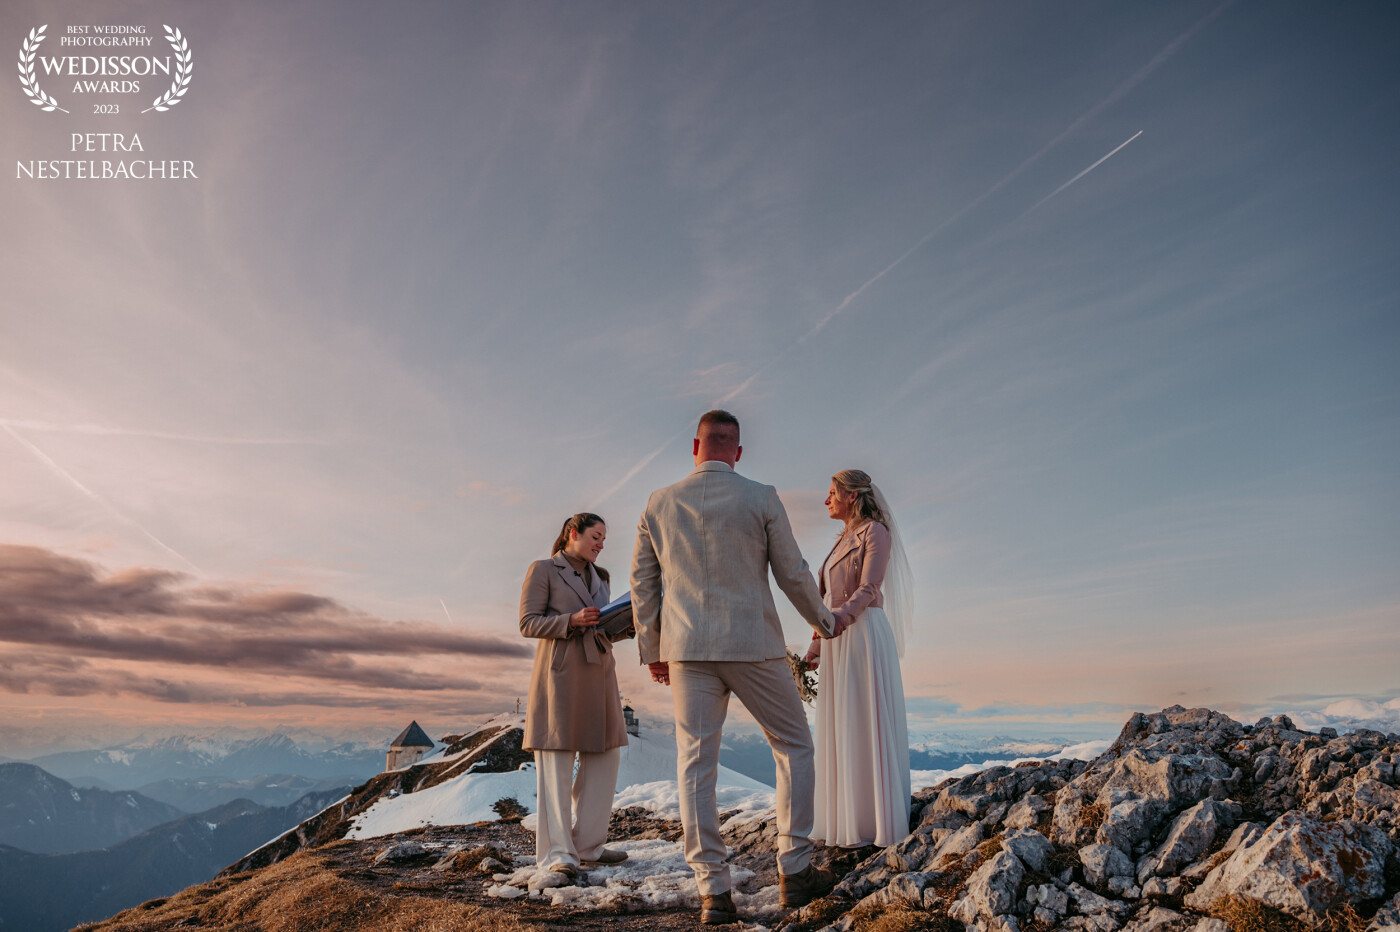 It was a wonderful elopement on the peak of an 2143m high mountain in Austria. The wedding ceremony took place during sunset and after a typical austrian dinner we spent the night in the mountain hut. The next day we had amazing fun going down the mountain with wodden sleds.